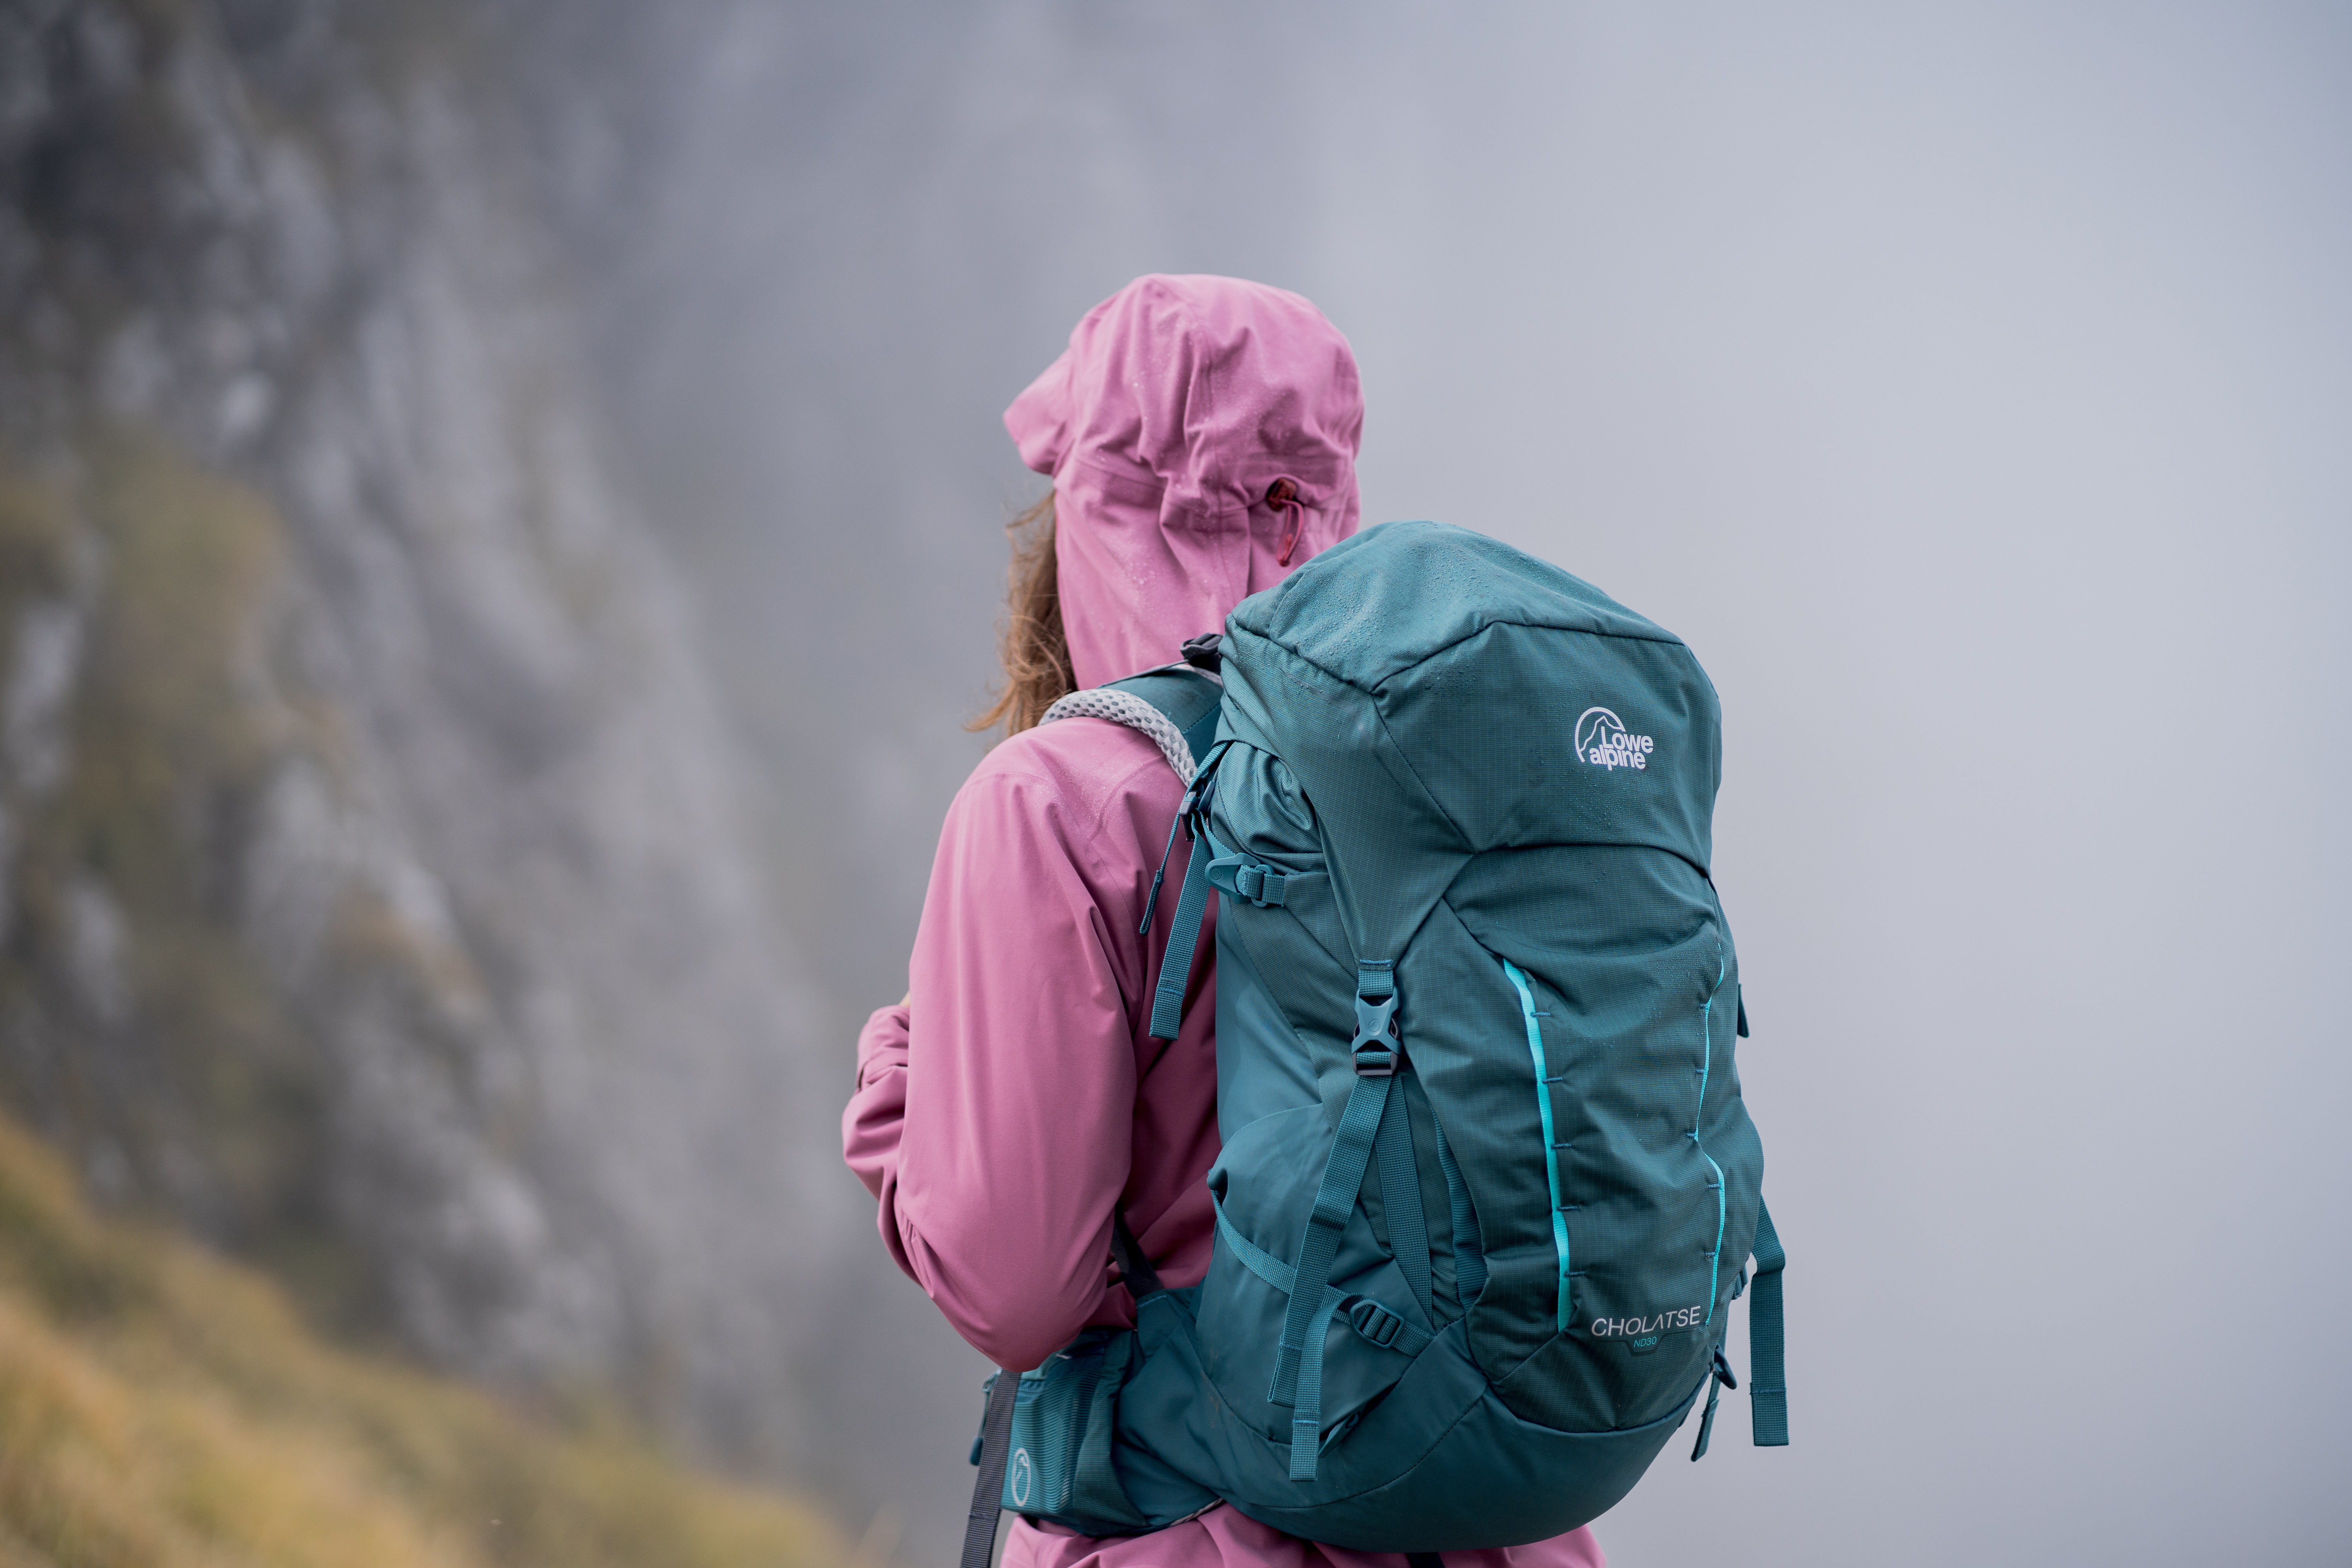 Hike, Ride, Repeat in the Best-fitting Backpacks